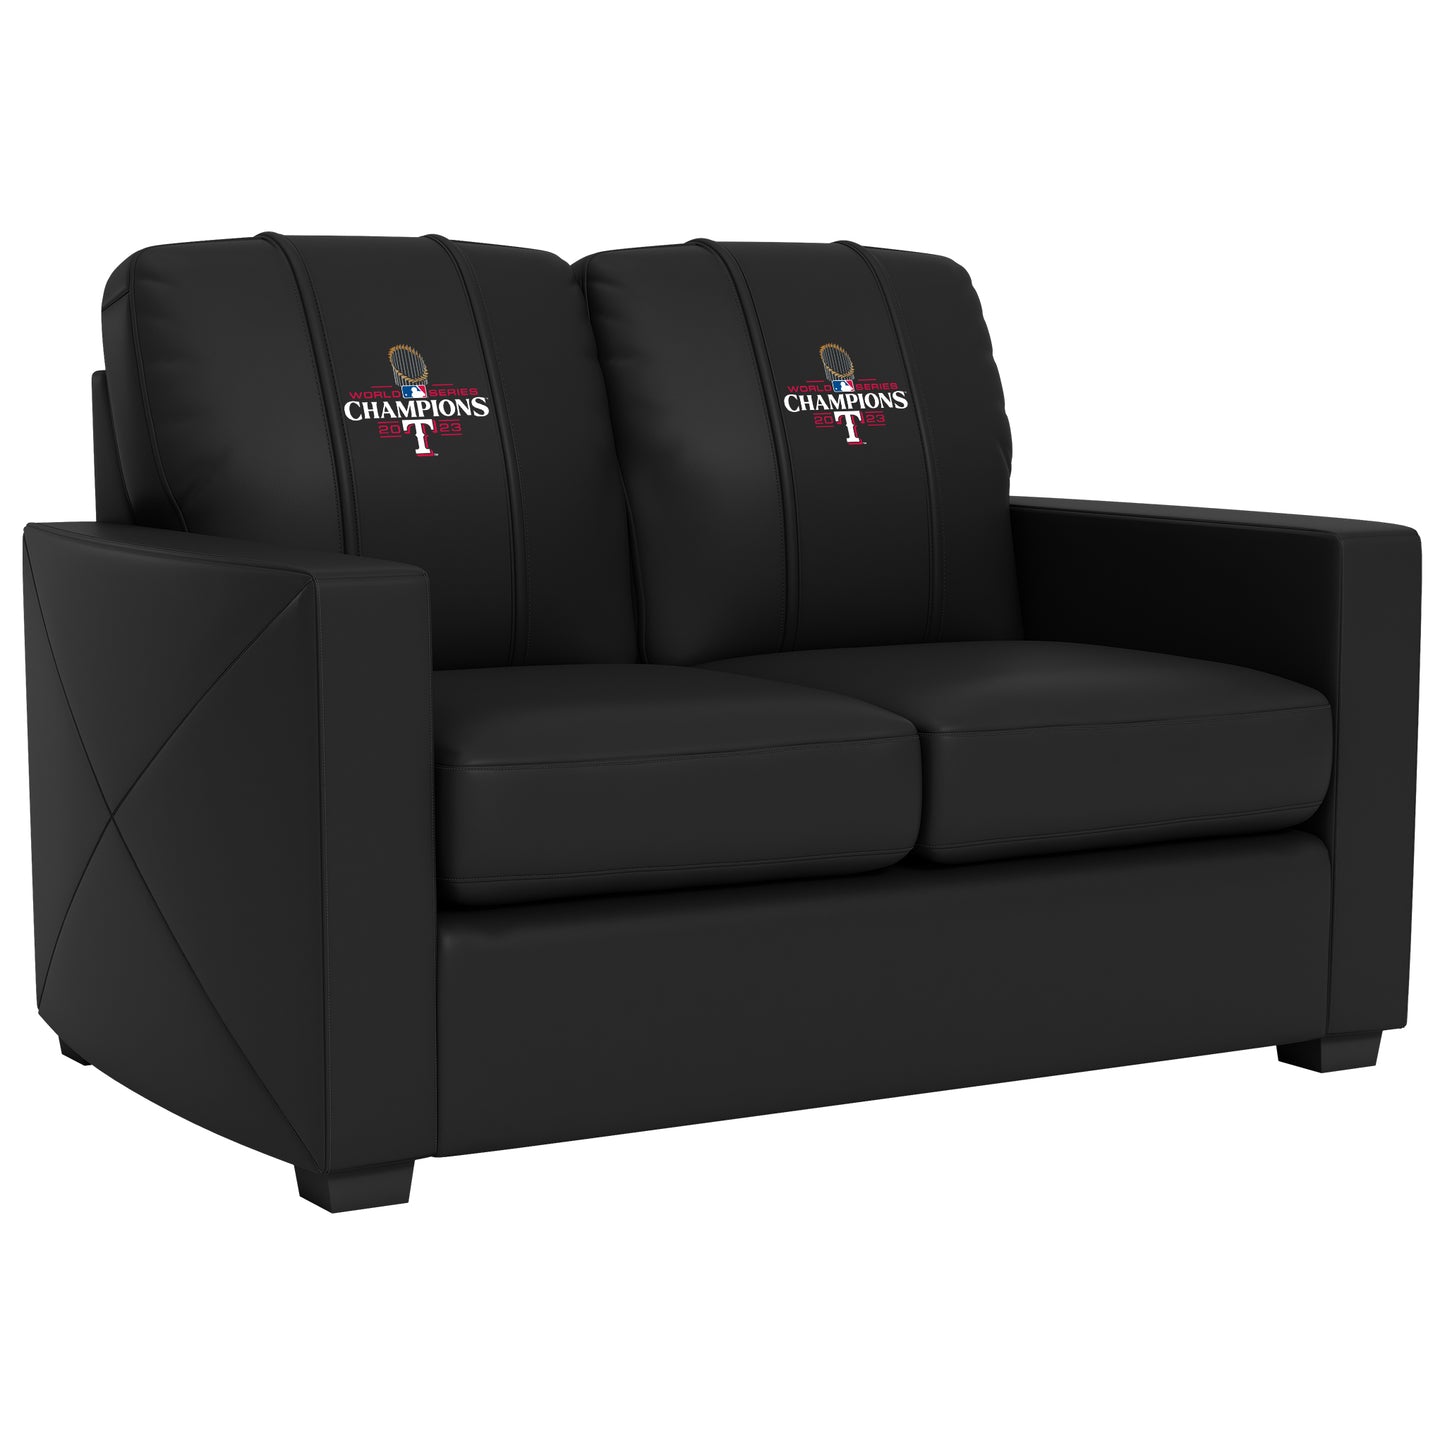 Silver Loveseat with Texas Rangers 2023 Champions Logo